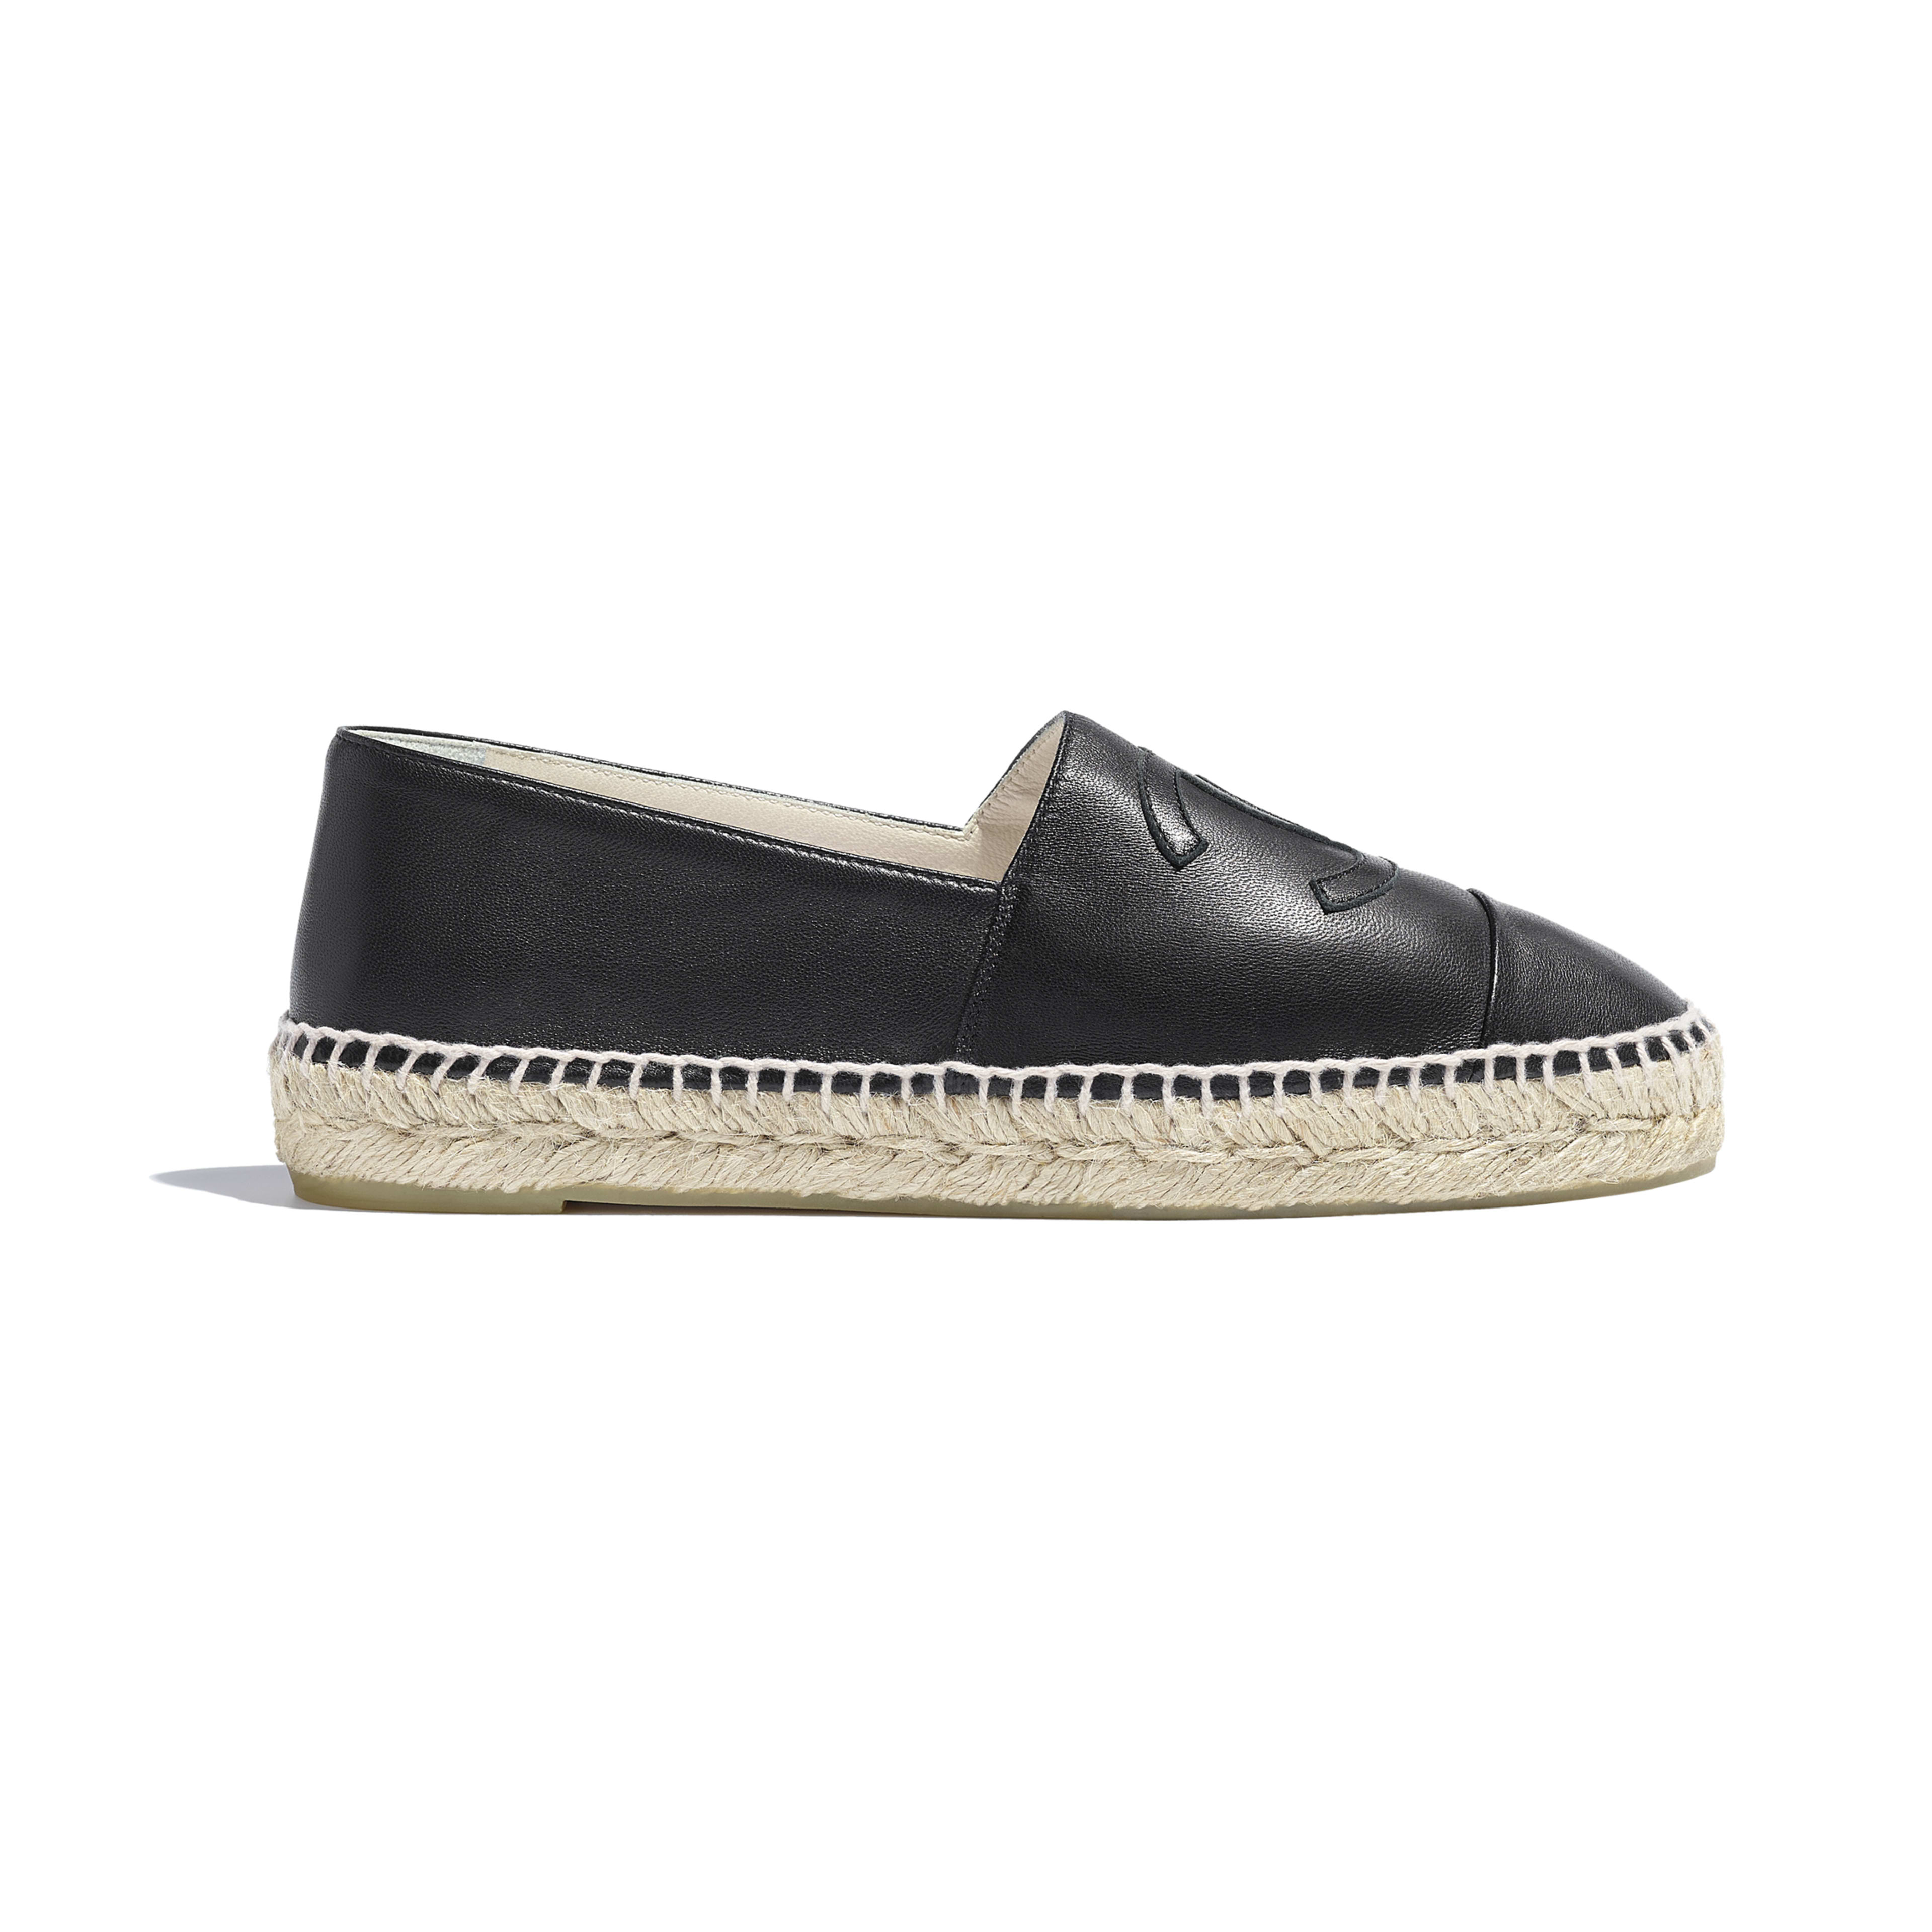 Leather espadrilles Chanel Black size 40 EU in Leather - 30627391